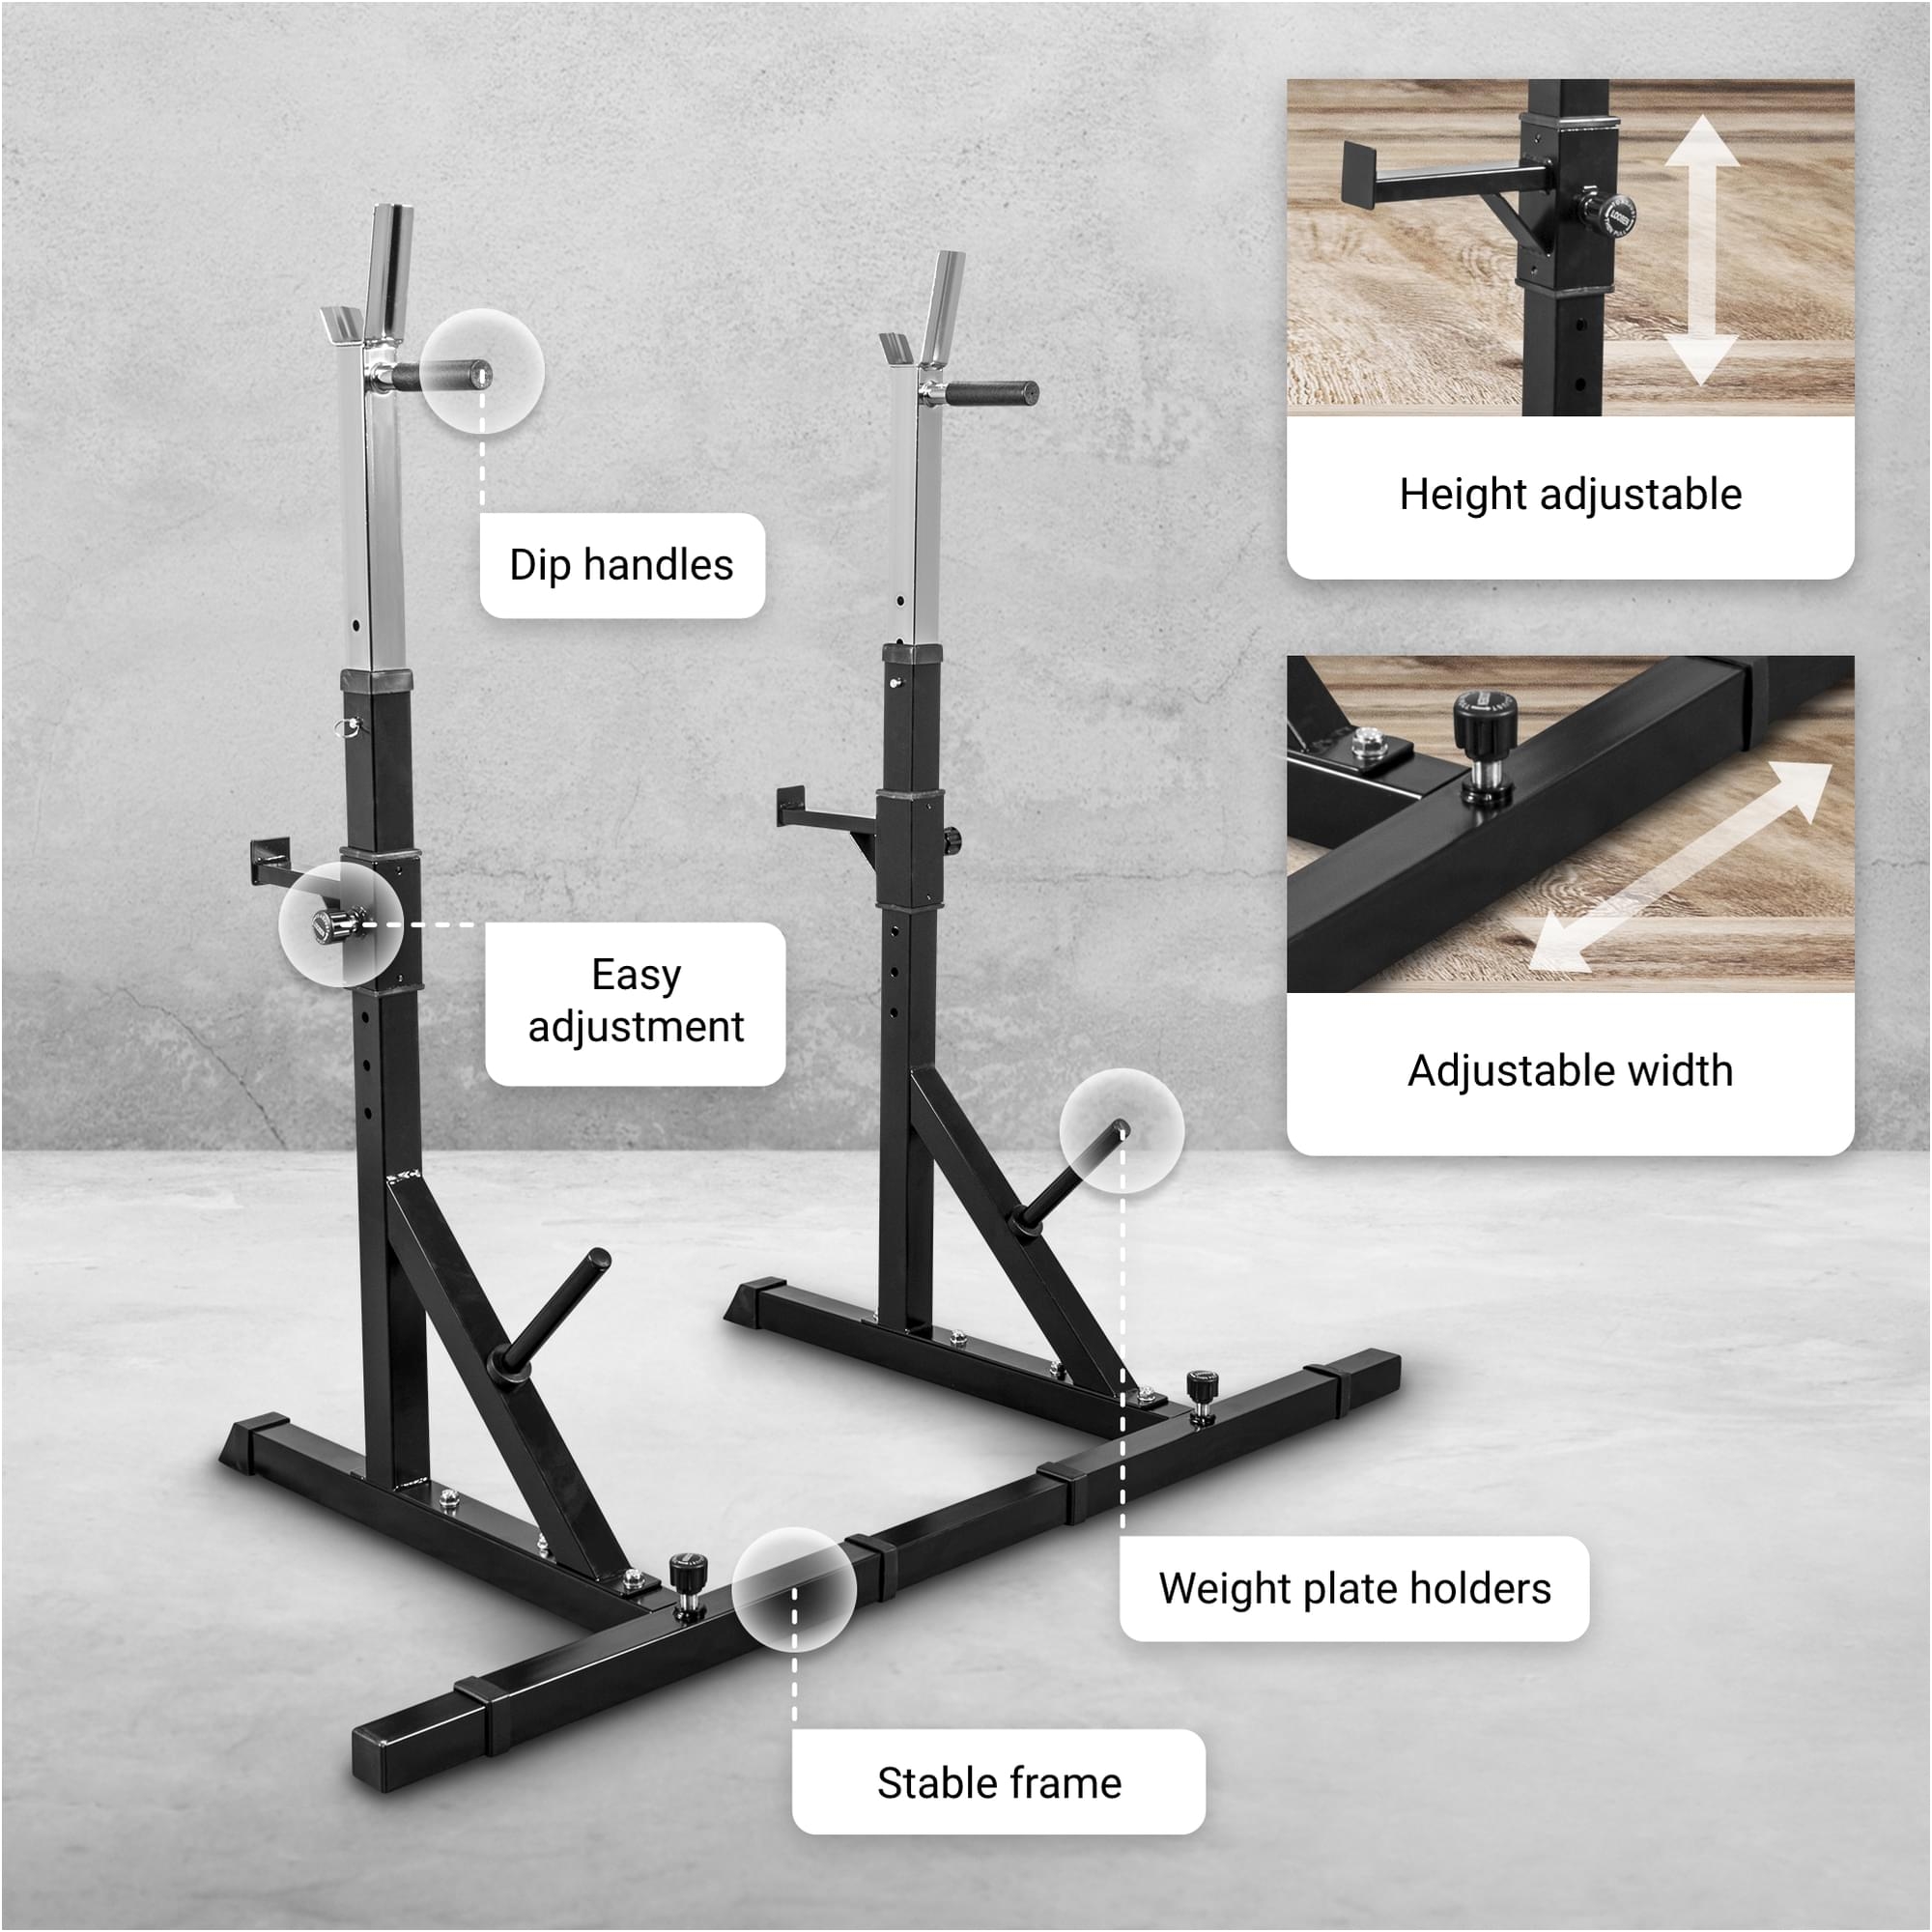 PLAYH Dumbbell Stand Barbell Rack Gorilla Sports Squat Rack Squat Stand Adjustable Height Bench Press Stand For Weight Lifting Bench Strength Training Home Gym,Max Load 300 KG 